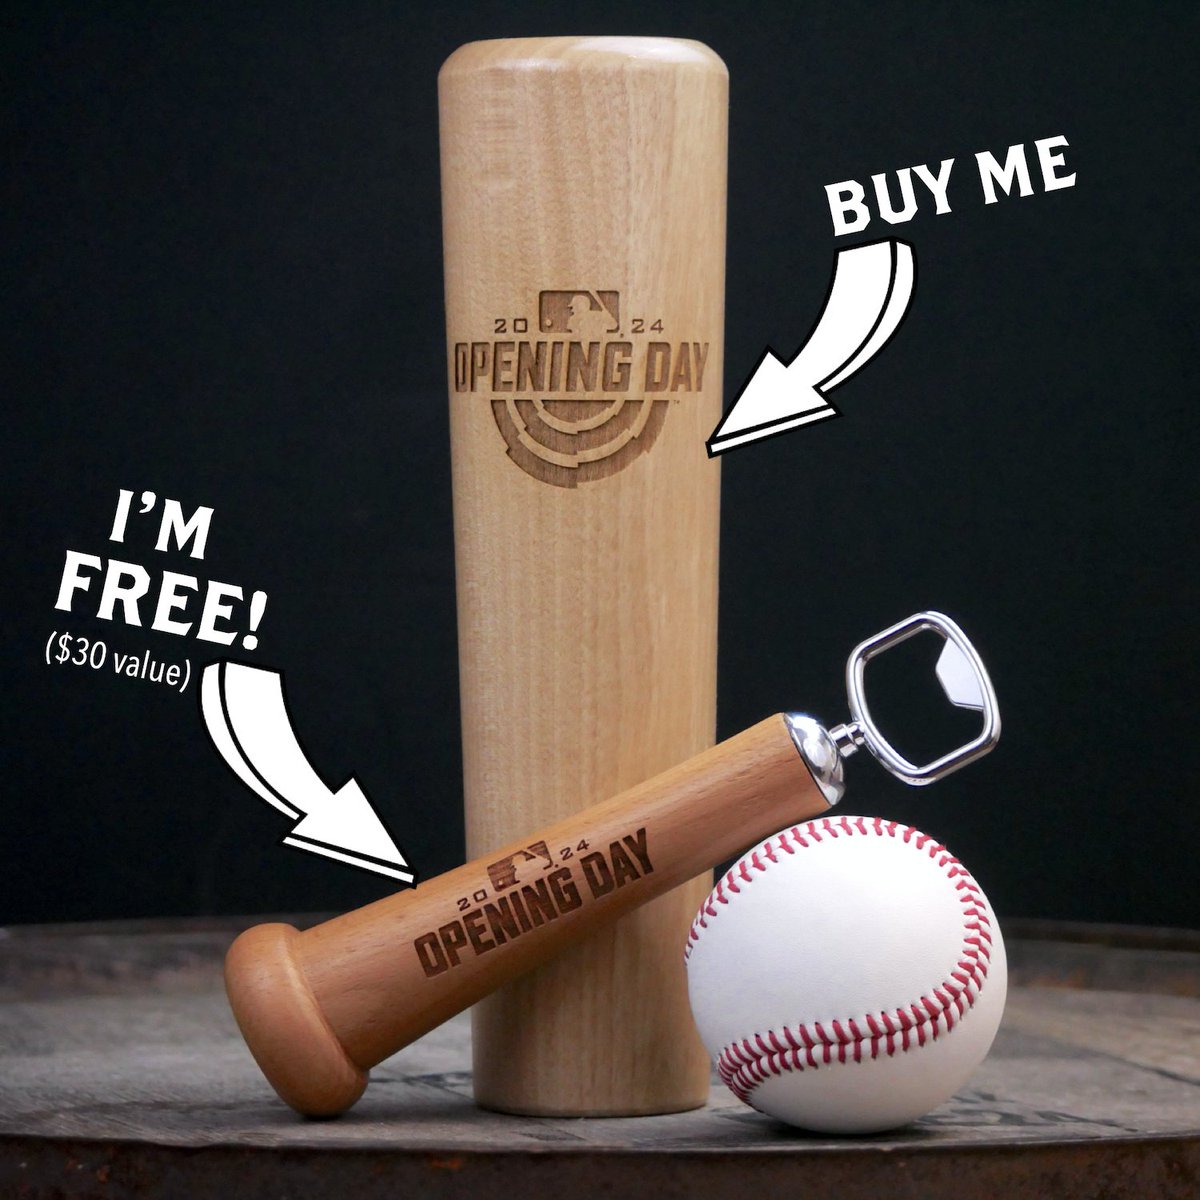 We are LIVE with the 2024 Opening Day commemorative combo! Order the mug (only 200 available) and get the matching opener for FREE! ORDER HERE: dugoutmugs.com/products/2024-… #baseball #openingday #batmug #dugoutmugs #mlb #gift #giftidea #openingday2024 $promo #free #bogo